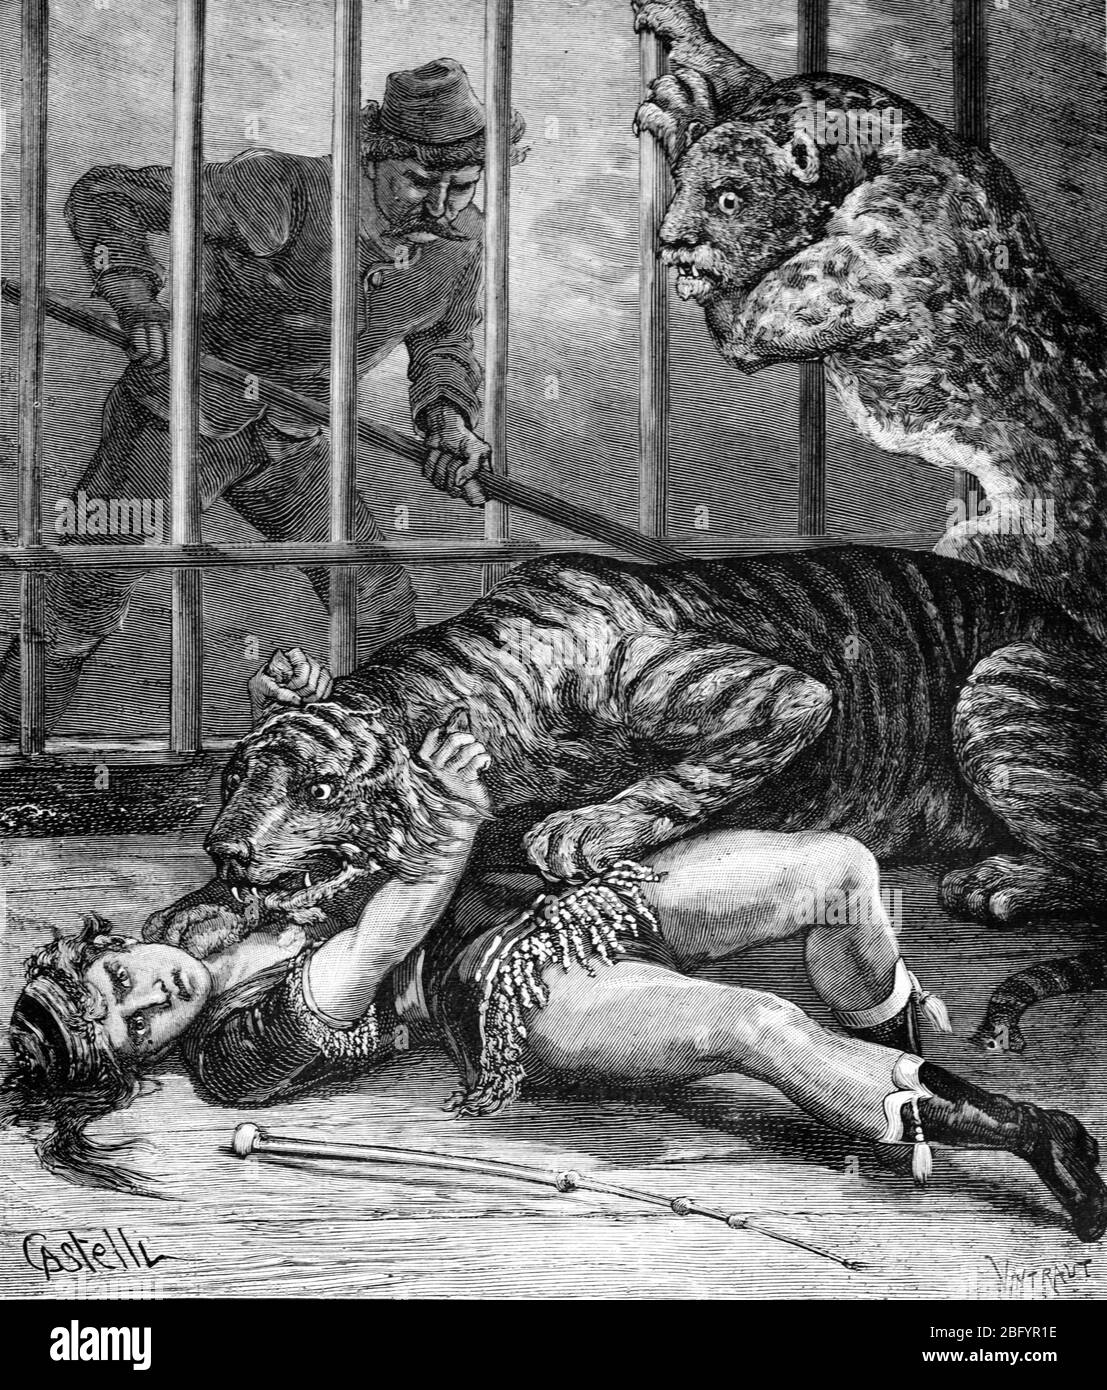 Regina dei Lions, Tamer Leone o Trainer Leone, Helen Blight Mauled & Killed by Tigers a Cage Londra Inghilterra. Vintage of Old Illustration o Engraving 1889 Foto Stock